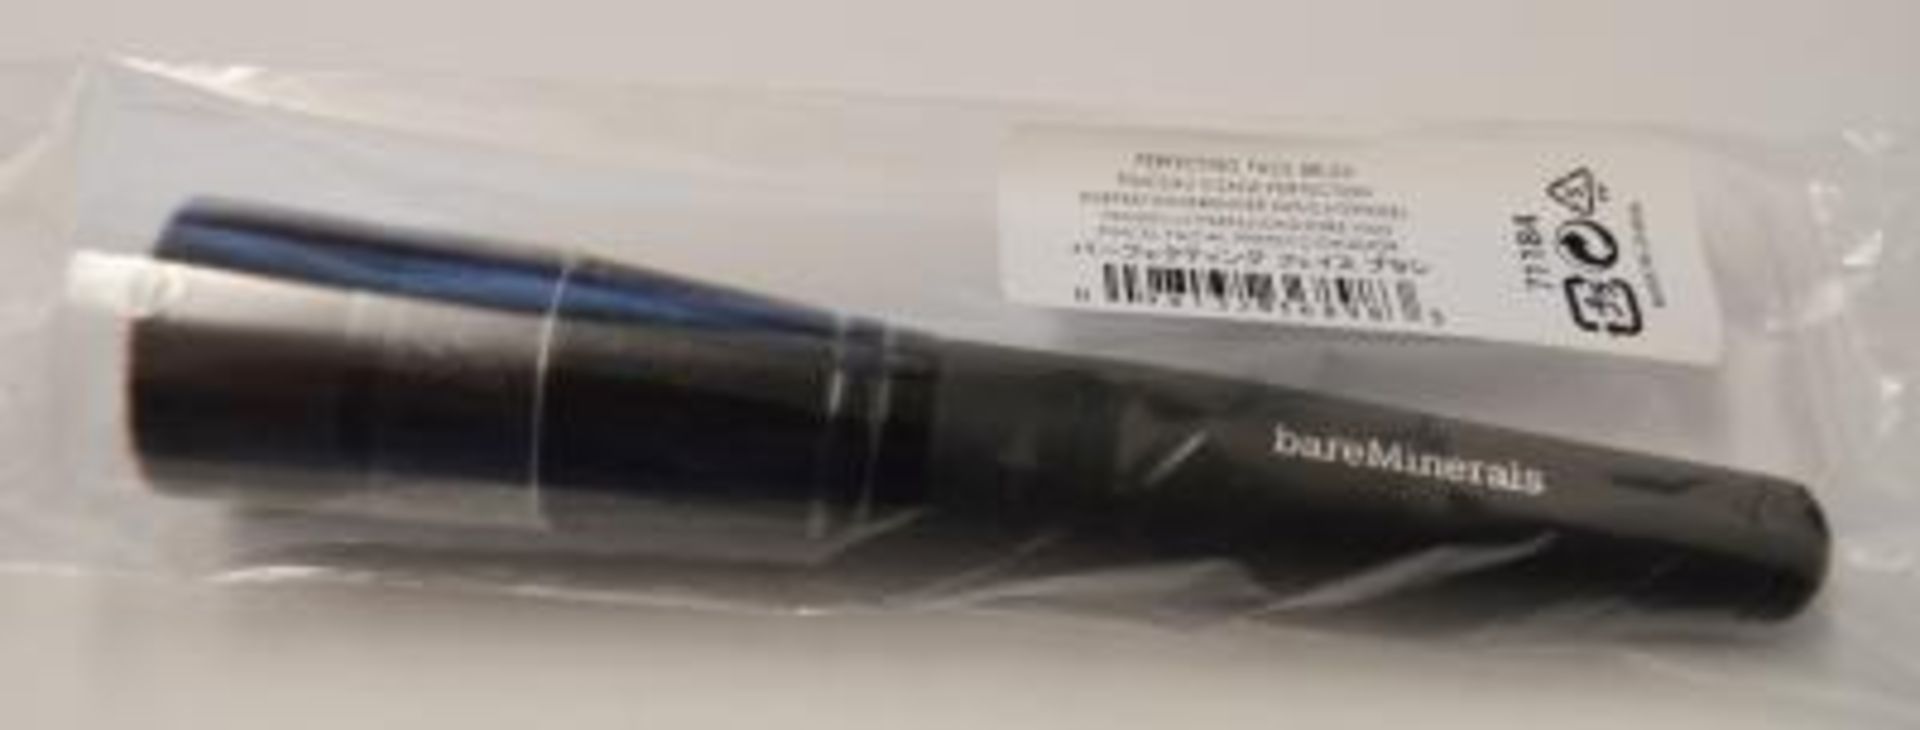 1 x Bare Escentuals bareMinerals “BARESKIN” Perfecting Face Brush - Genuine Product - Brand New - Image 14 of 14